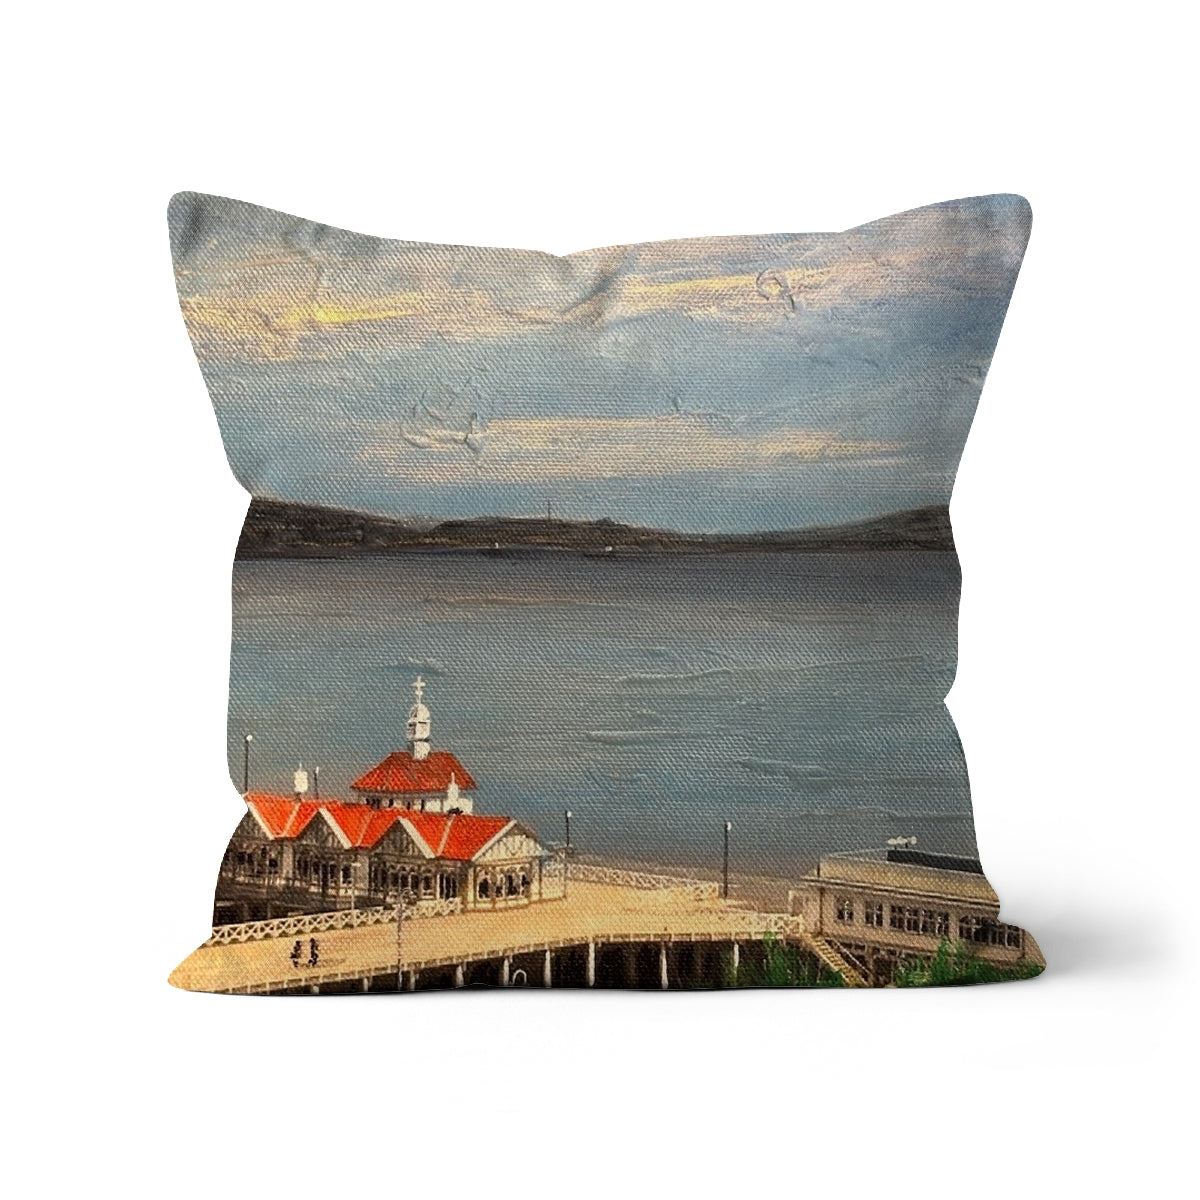 Looking From Dunoon Art Gifts Cushion-Cushions-River Clyde Art Gallery-Linen-18"x18"-Paintings, Prints, Homeware, Art Gifts From Scotland By Scottish Artist Kevin Hunter